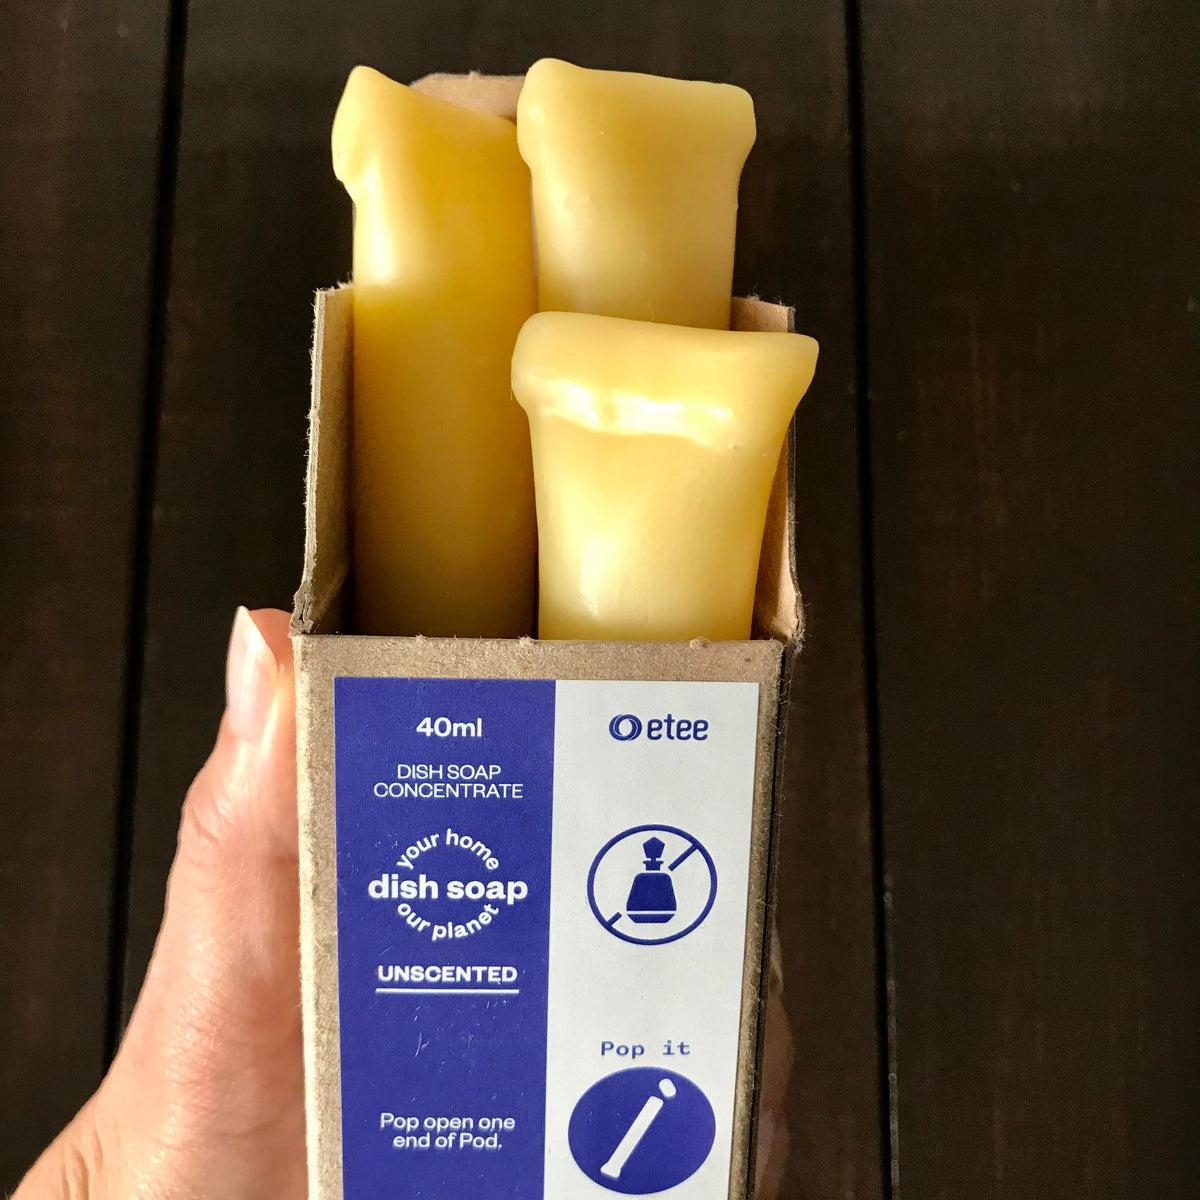 A hand holding a box of Etee concentrated dish soaps, packaged in beeswax